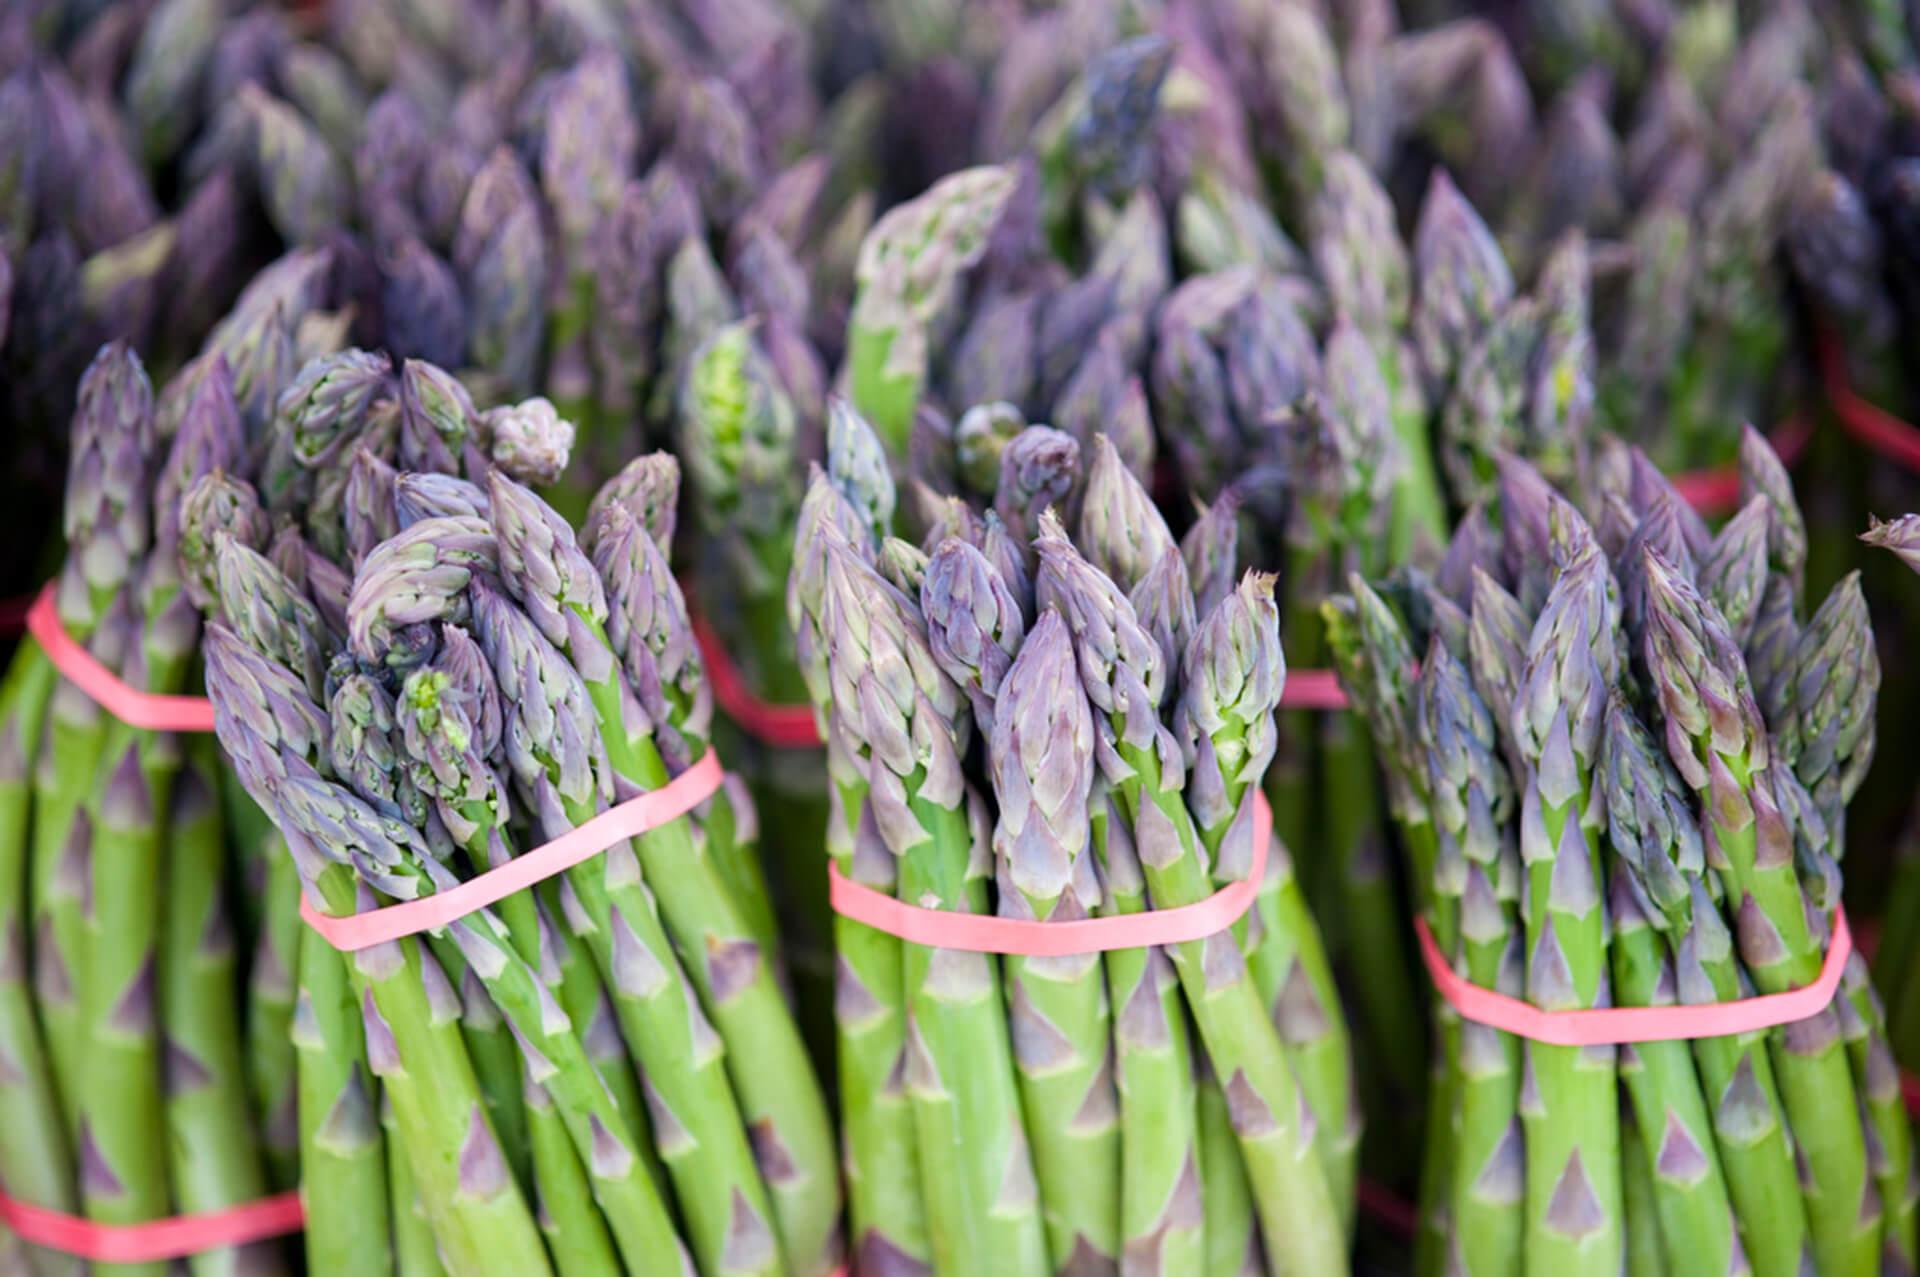 Bushels of green asparagus with purple colored tops